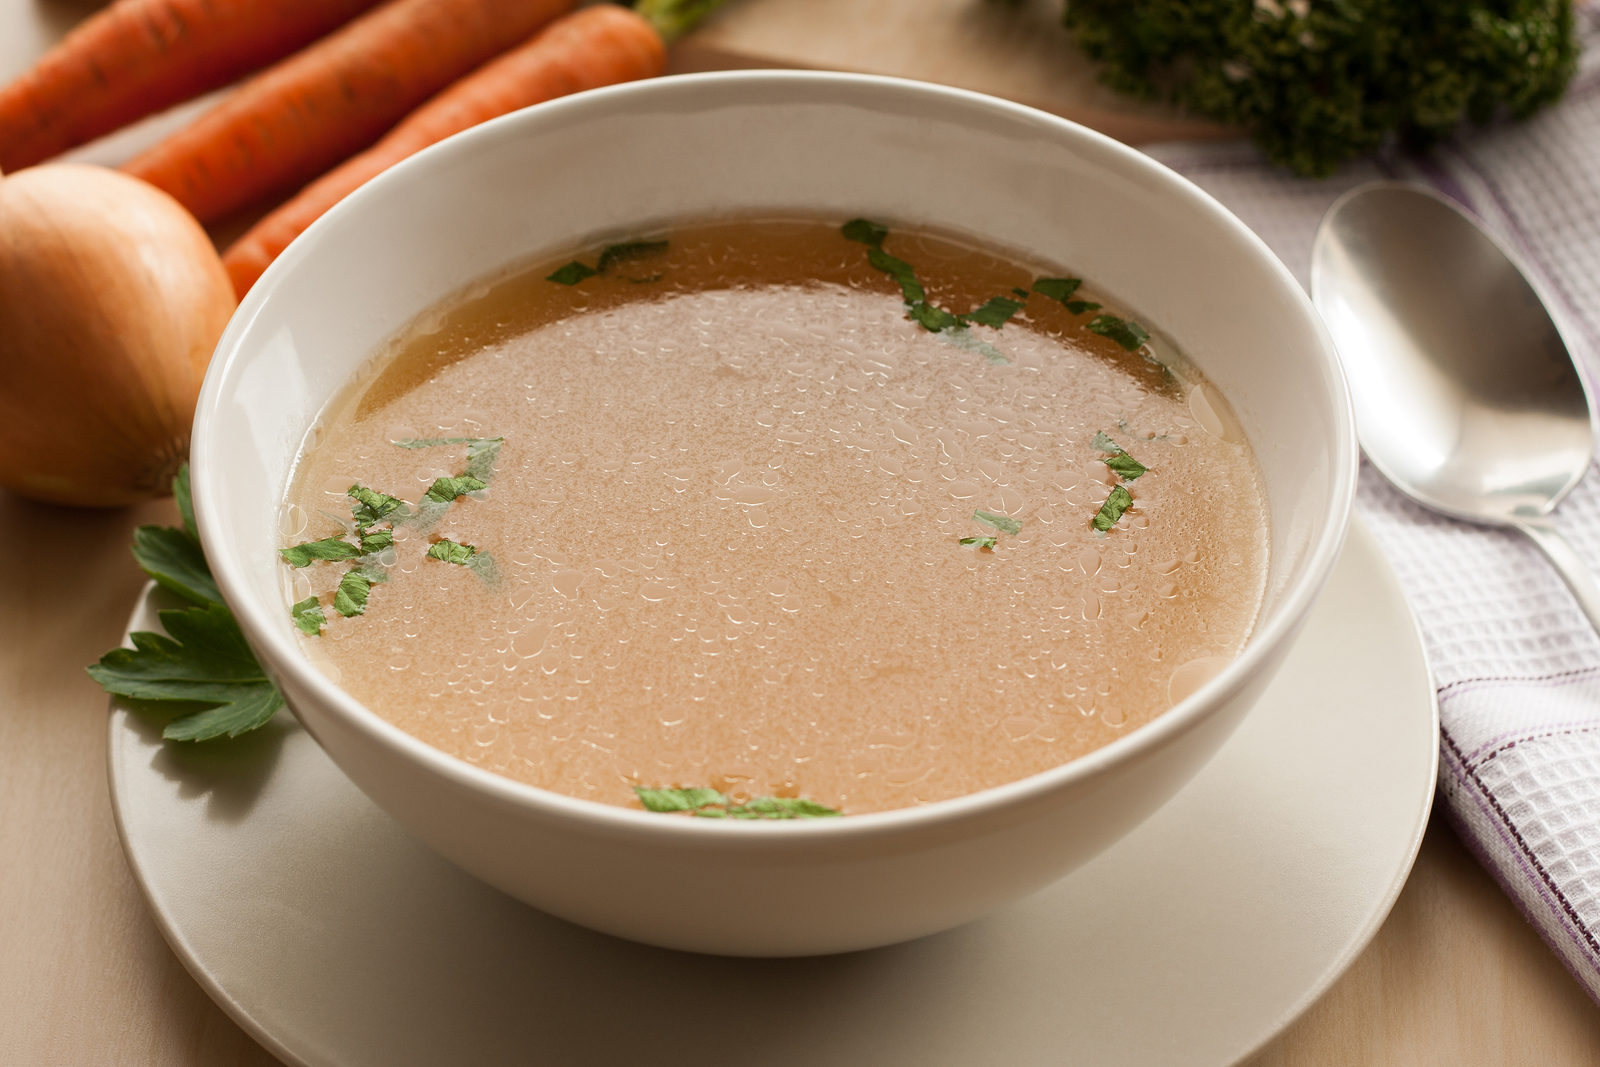 Bone broth made from chicken served in a bowl with parsley